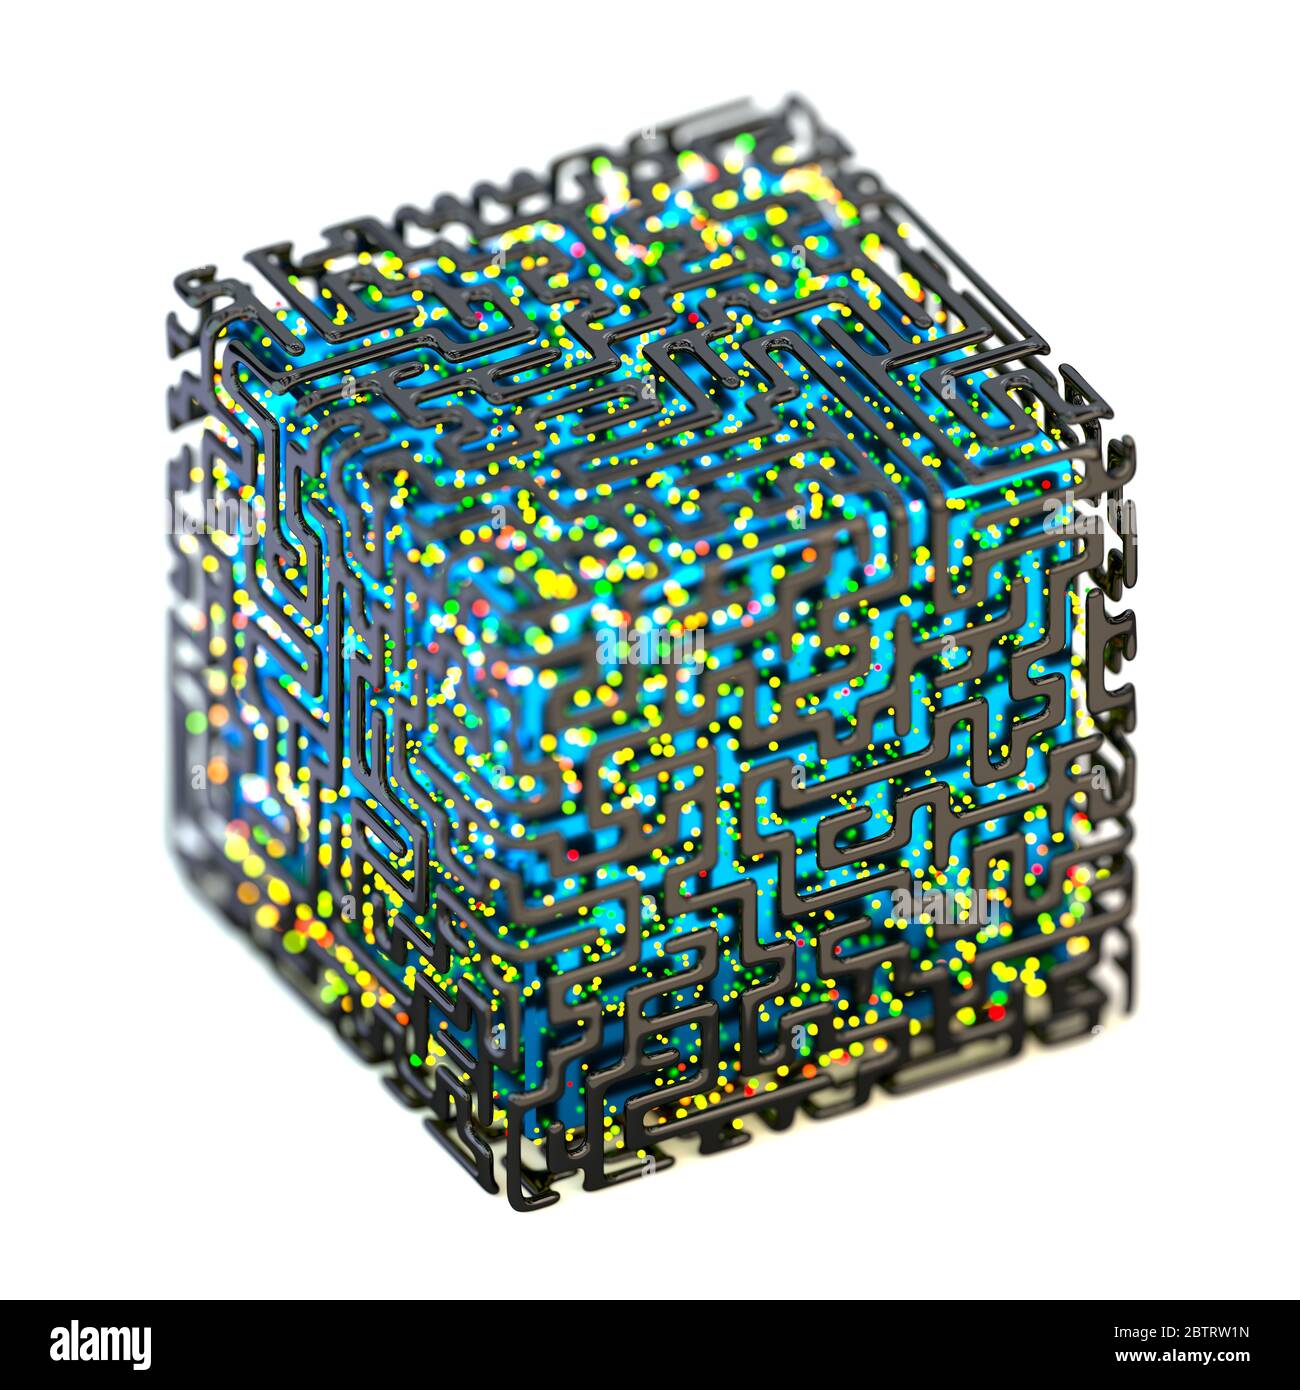 Concept of a cubic quantum computer, made of metallic maze and shiny colored particles, isolated on white background Stock Photo